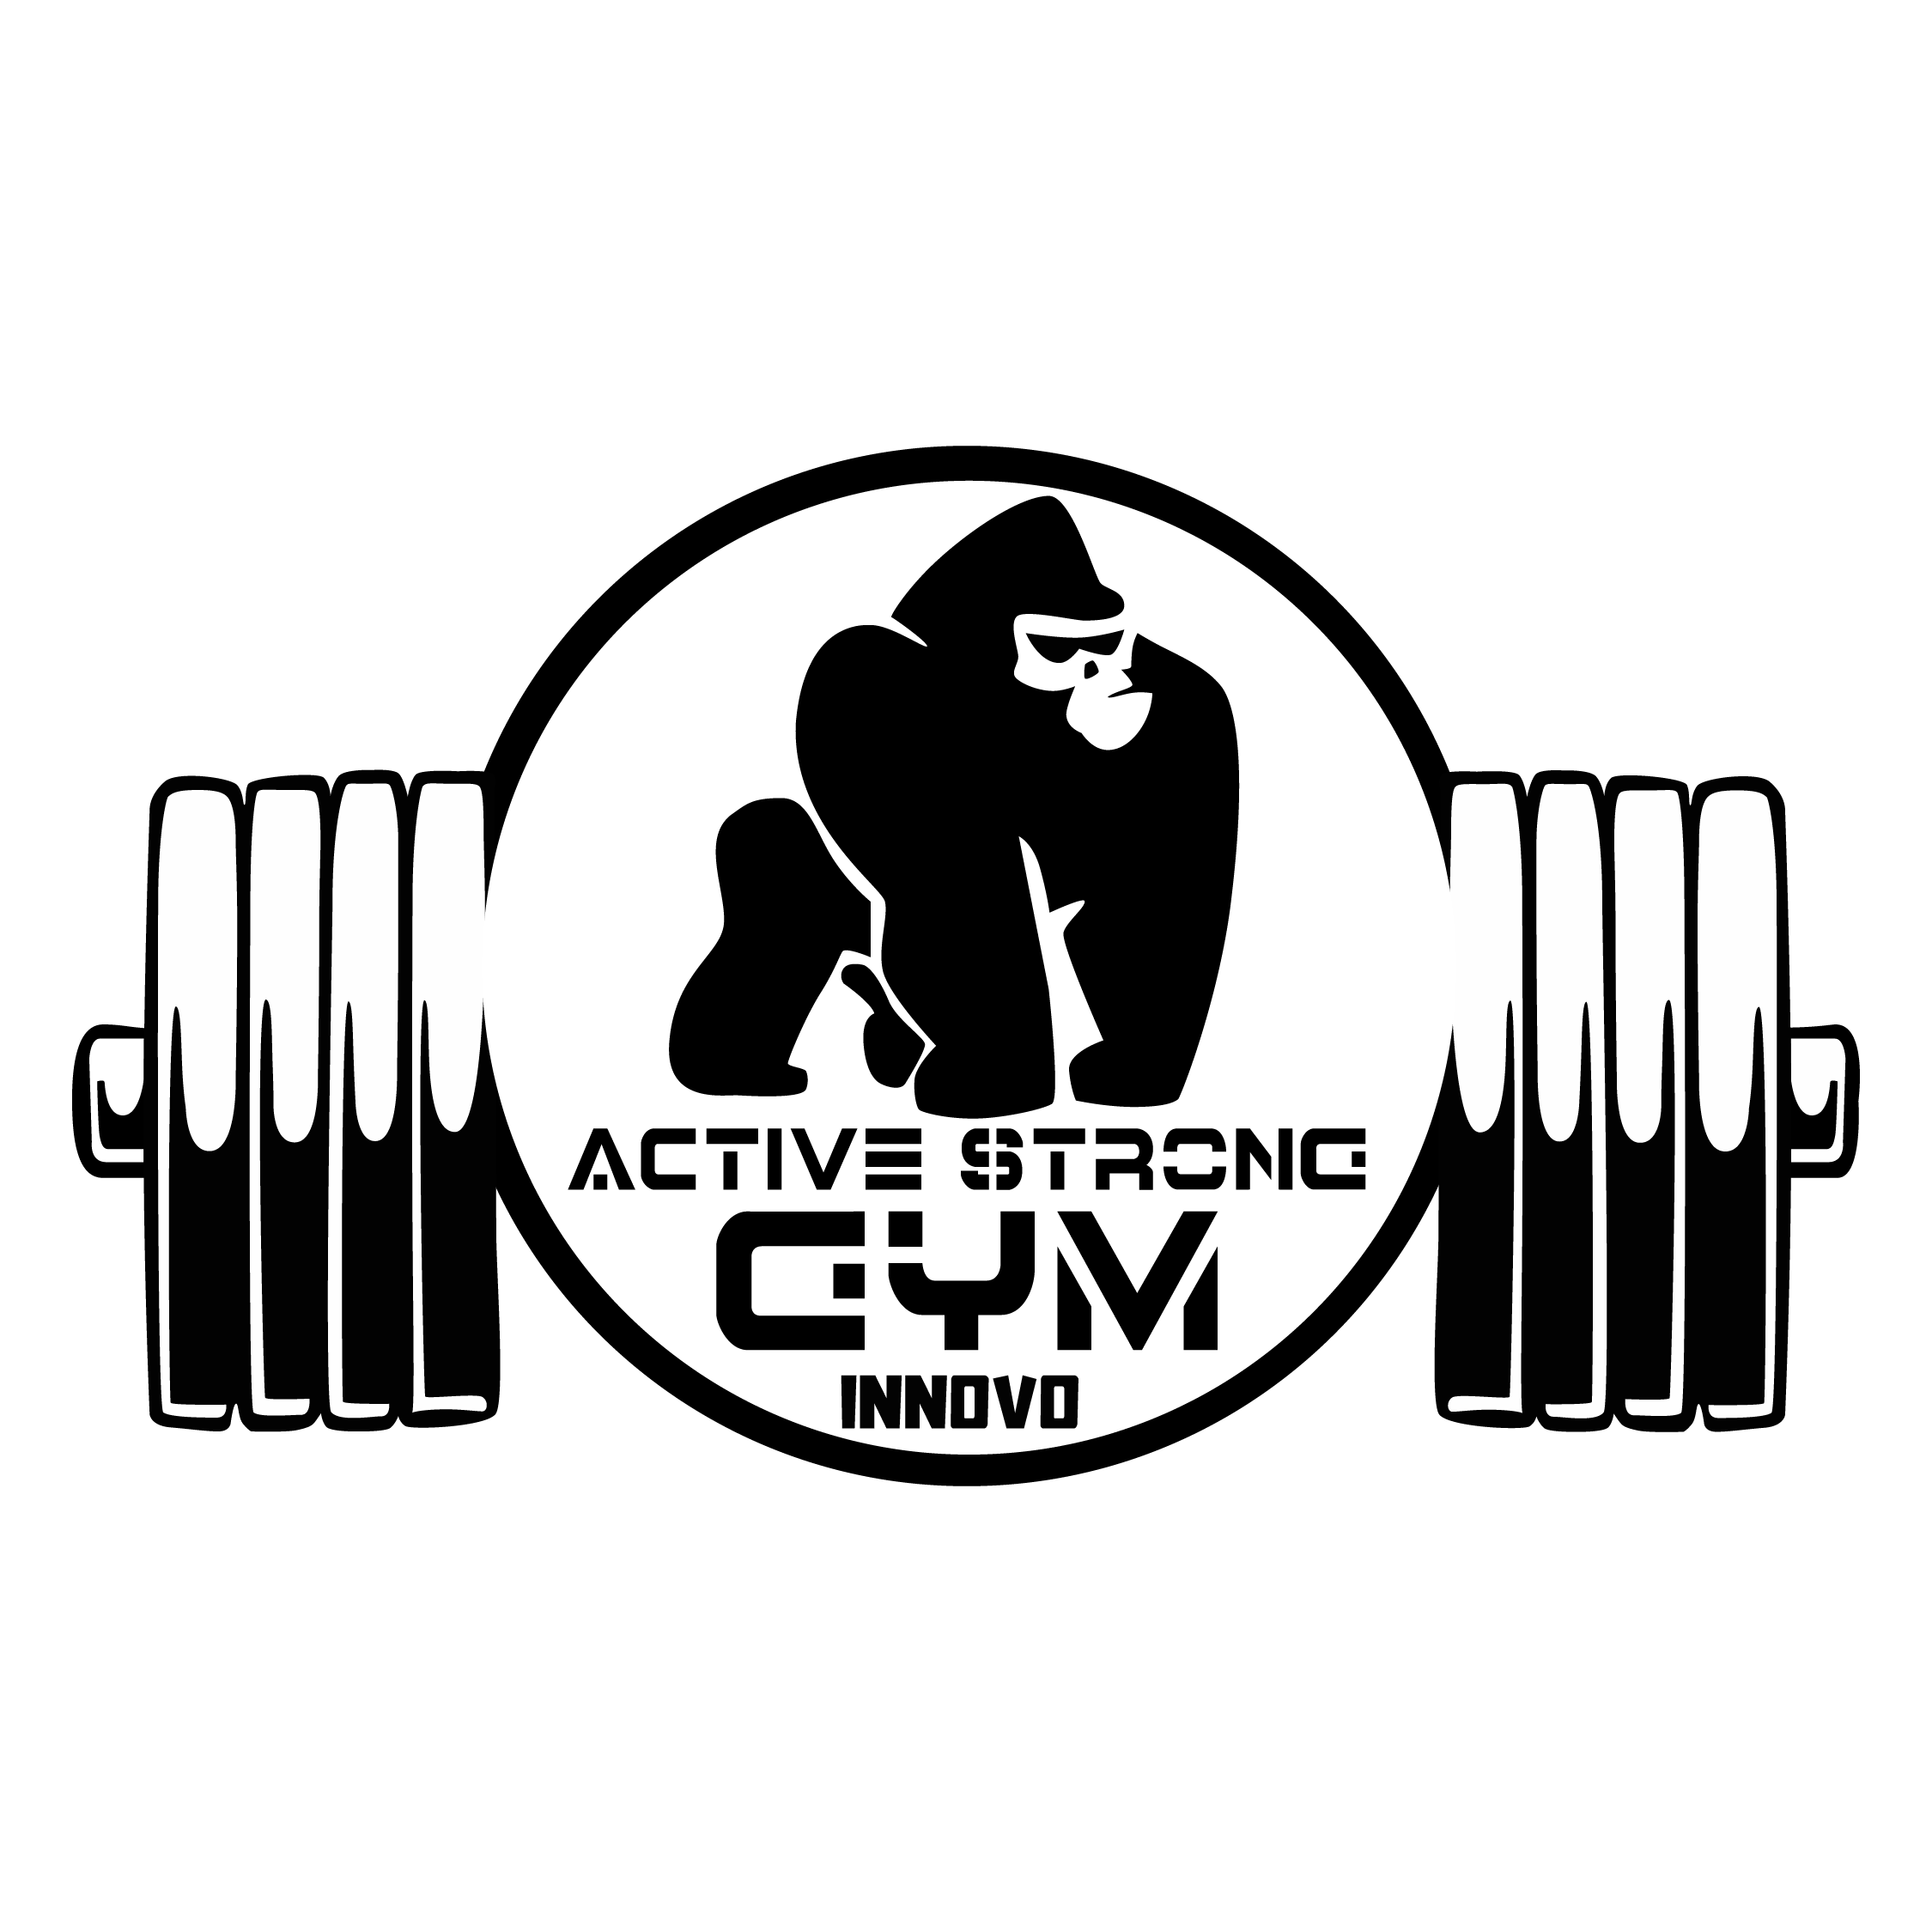  ACTIVE STRONG GYM